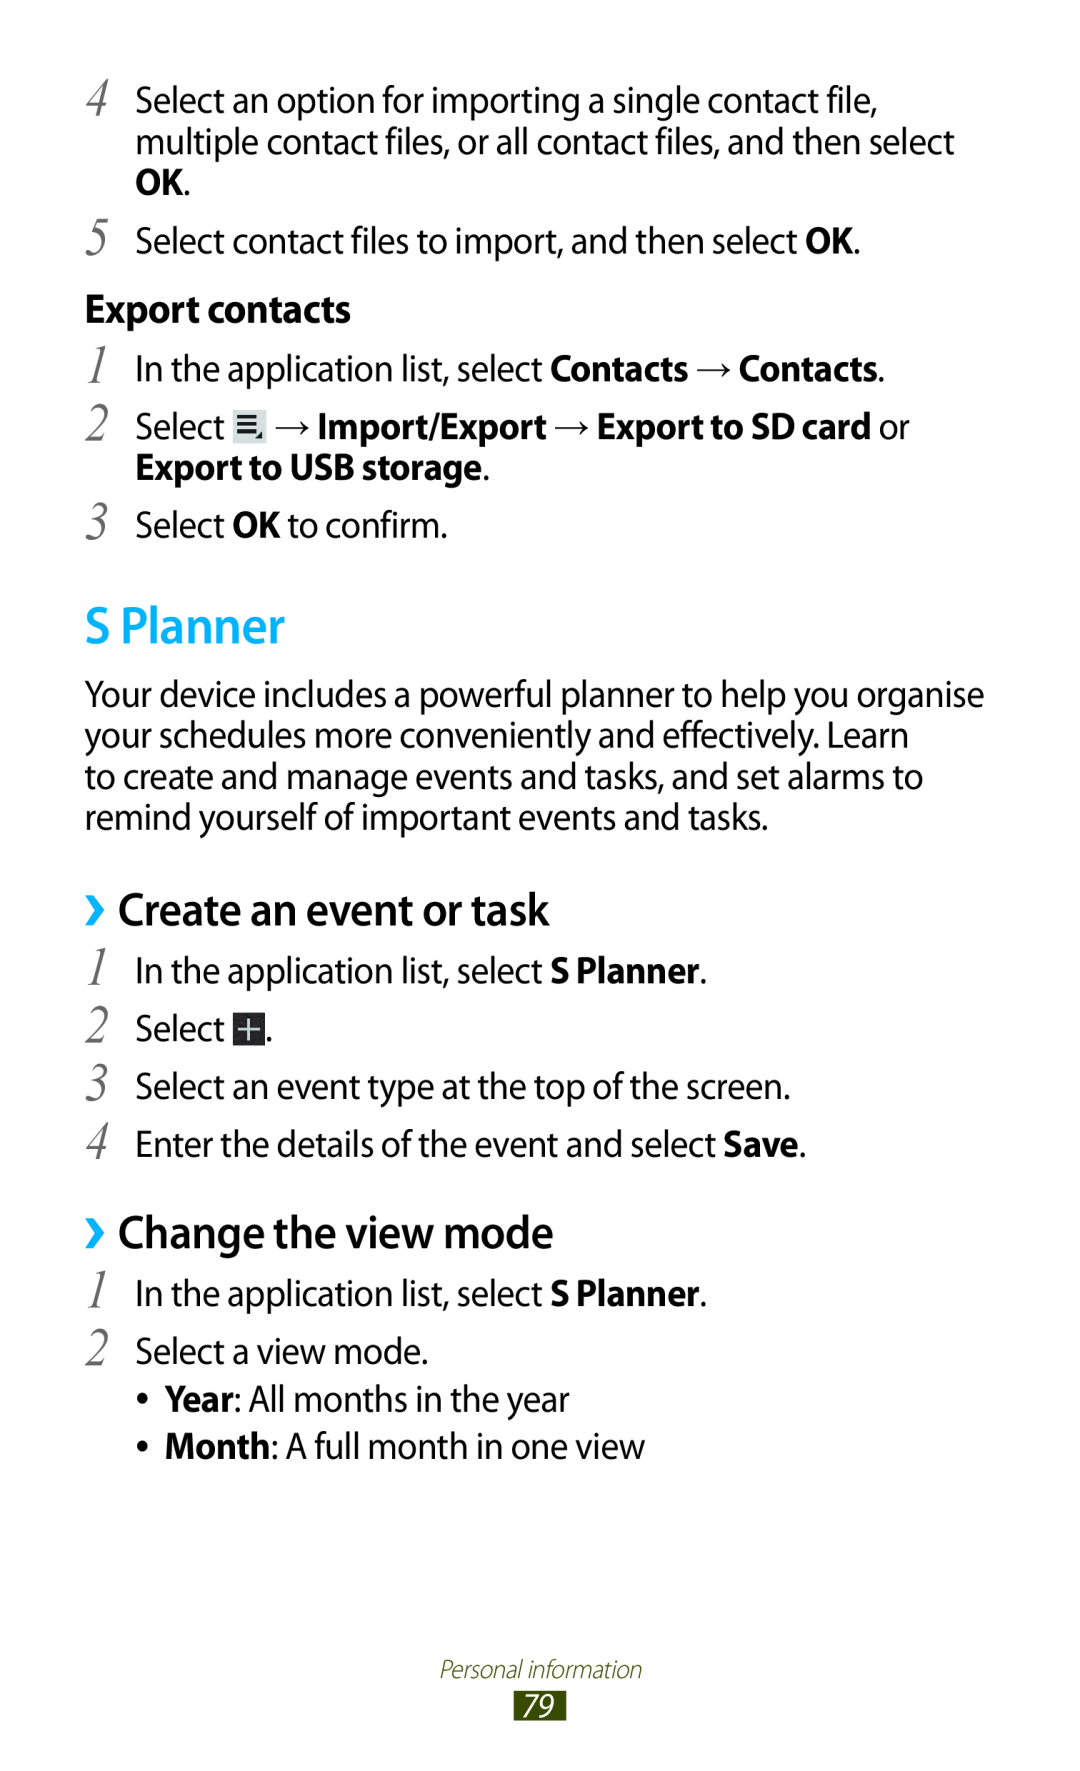 Samsung GTP5110ZWMTTT S Planner, ››Create an event or task, ››Change the view mode, Export contacts, Export to USB storage 